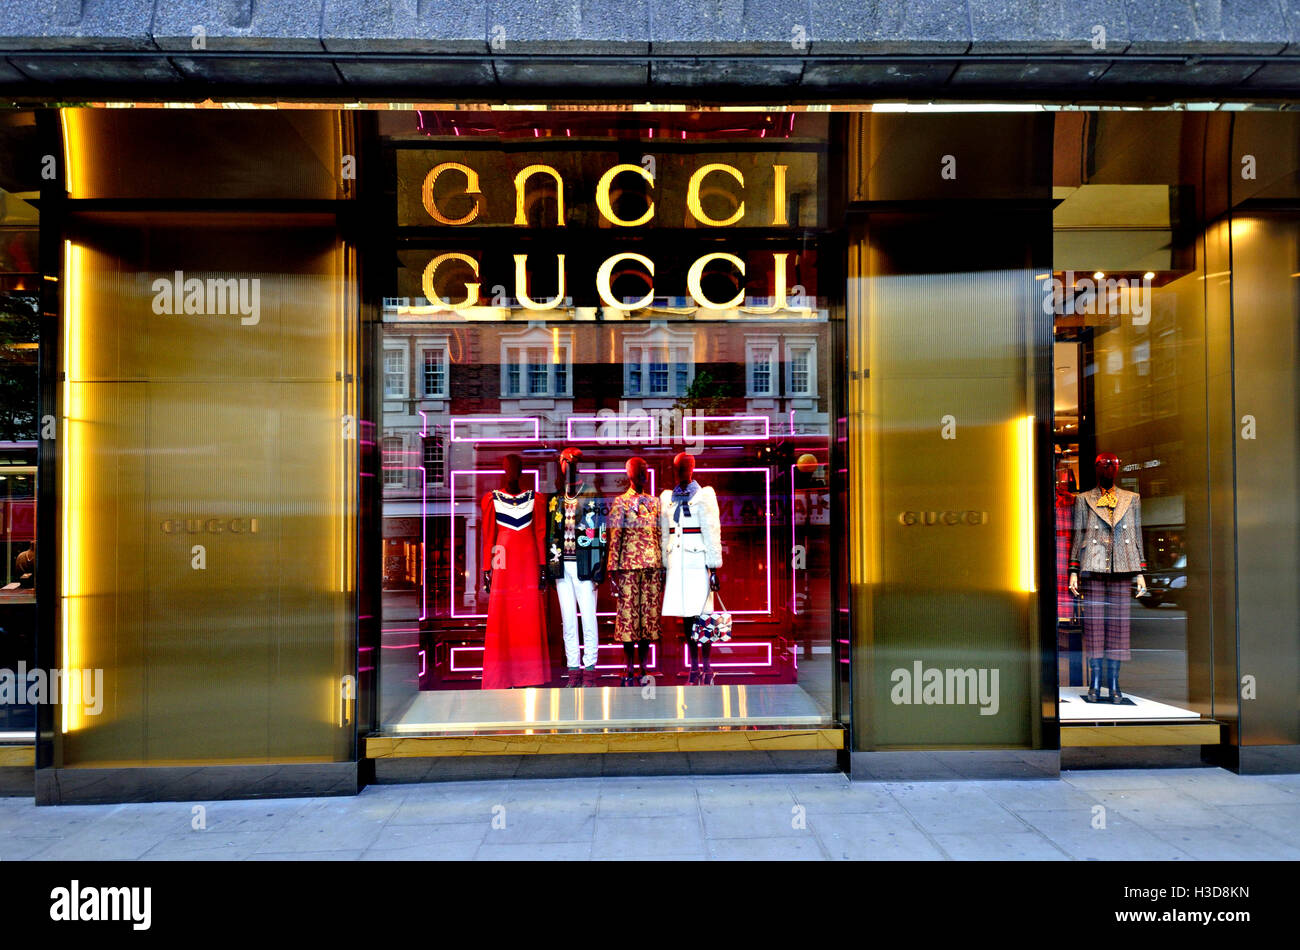 gucci store england